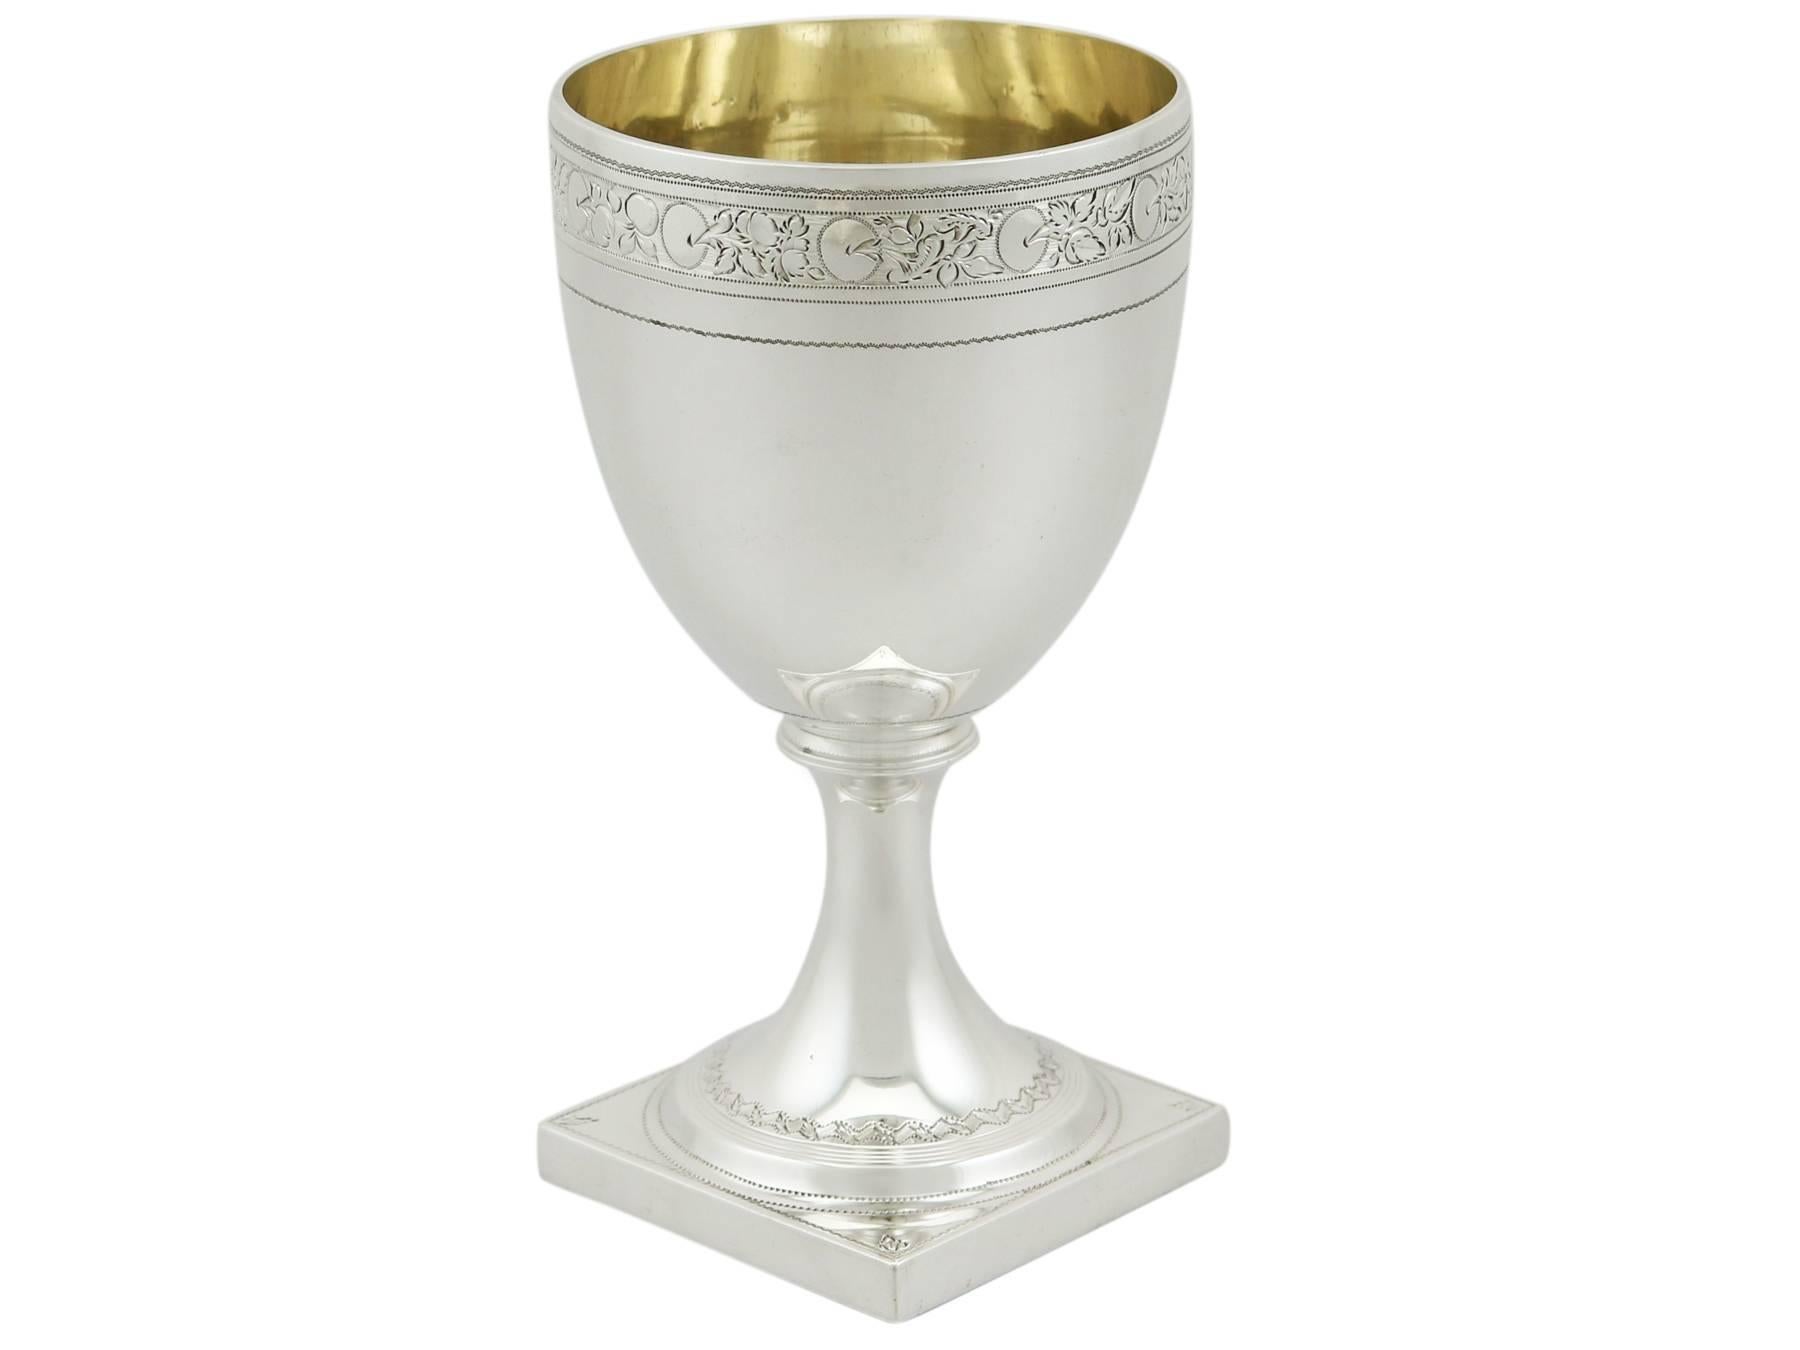 An exceptional, fine and impressive antique George III English sterling silver drinking goblet; an addition to AC Silver's Georgian wine and drinks related silverware collection.

This fine antique Georgian sterling silver drinking goblet has a